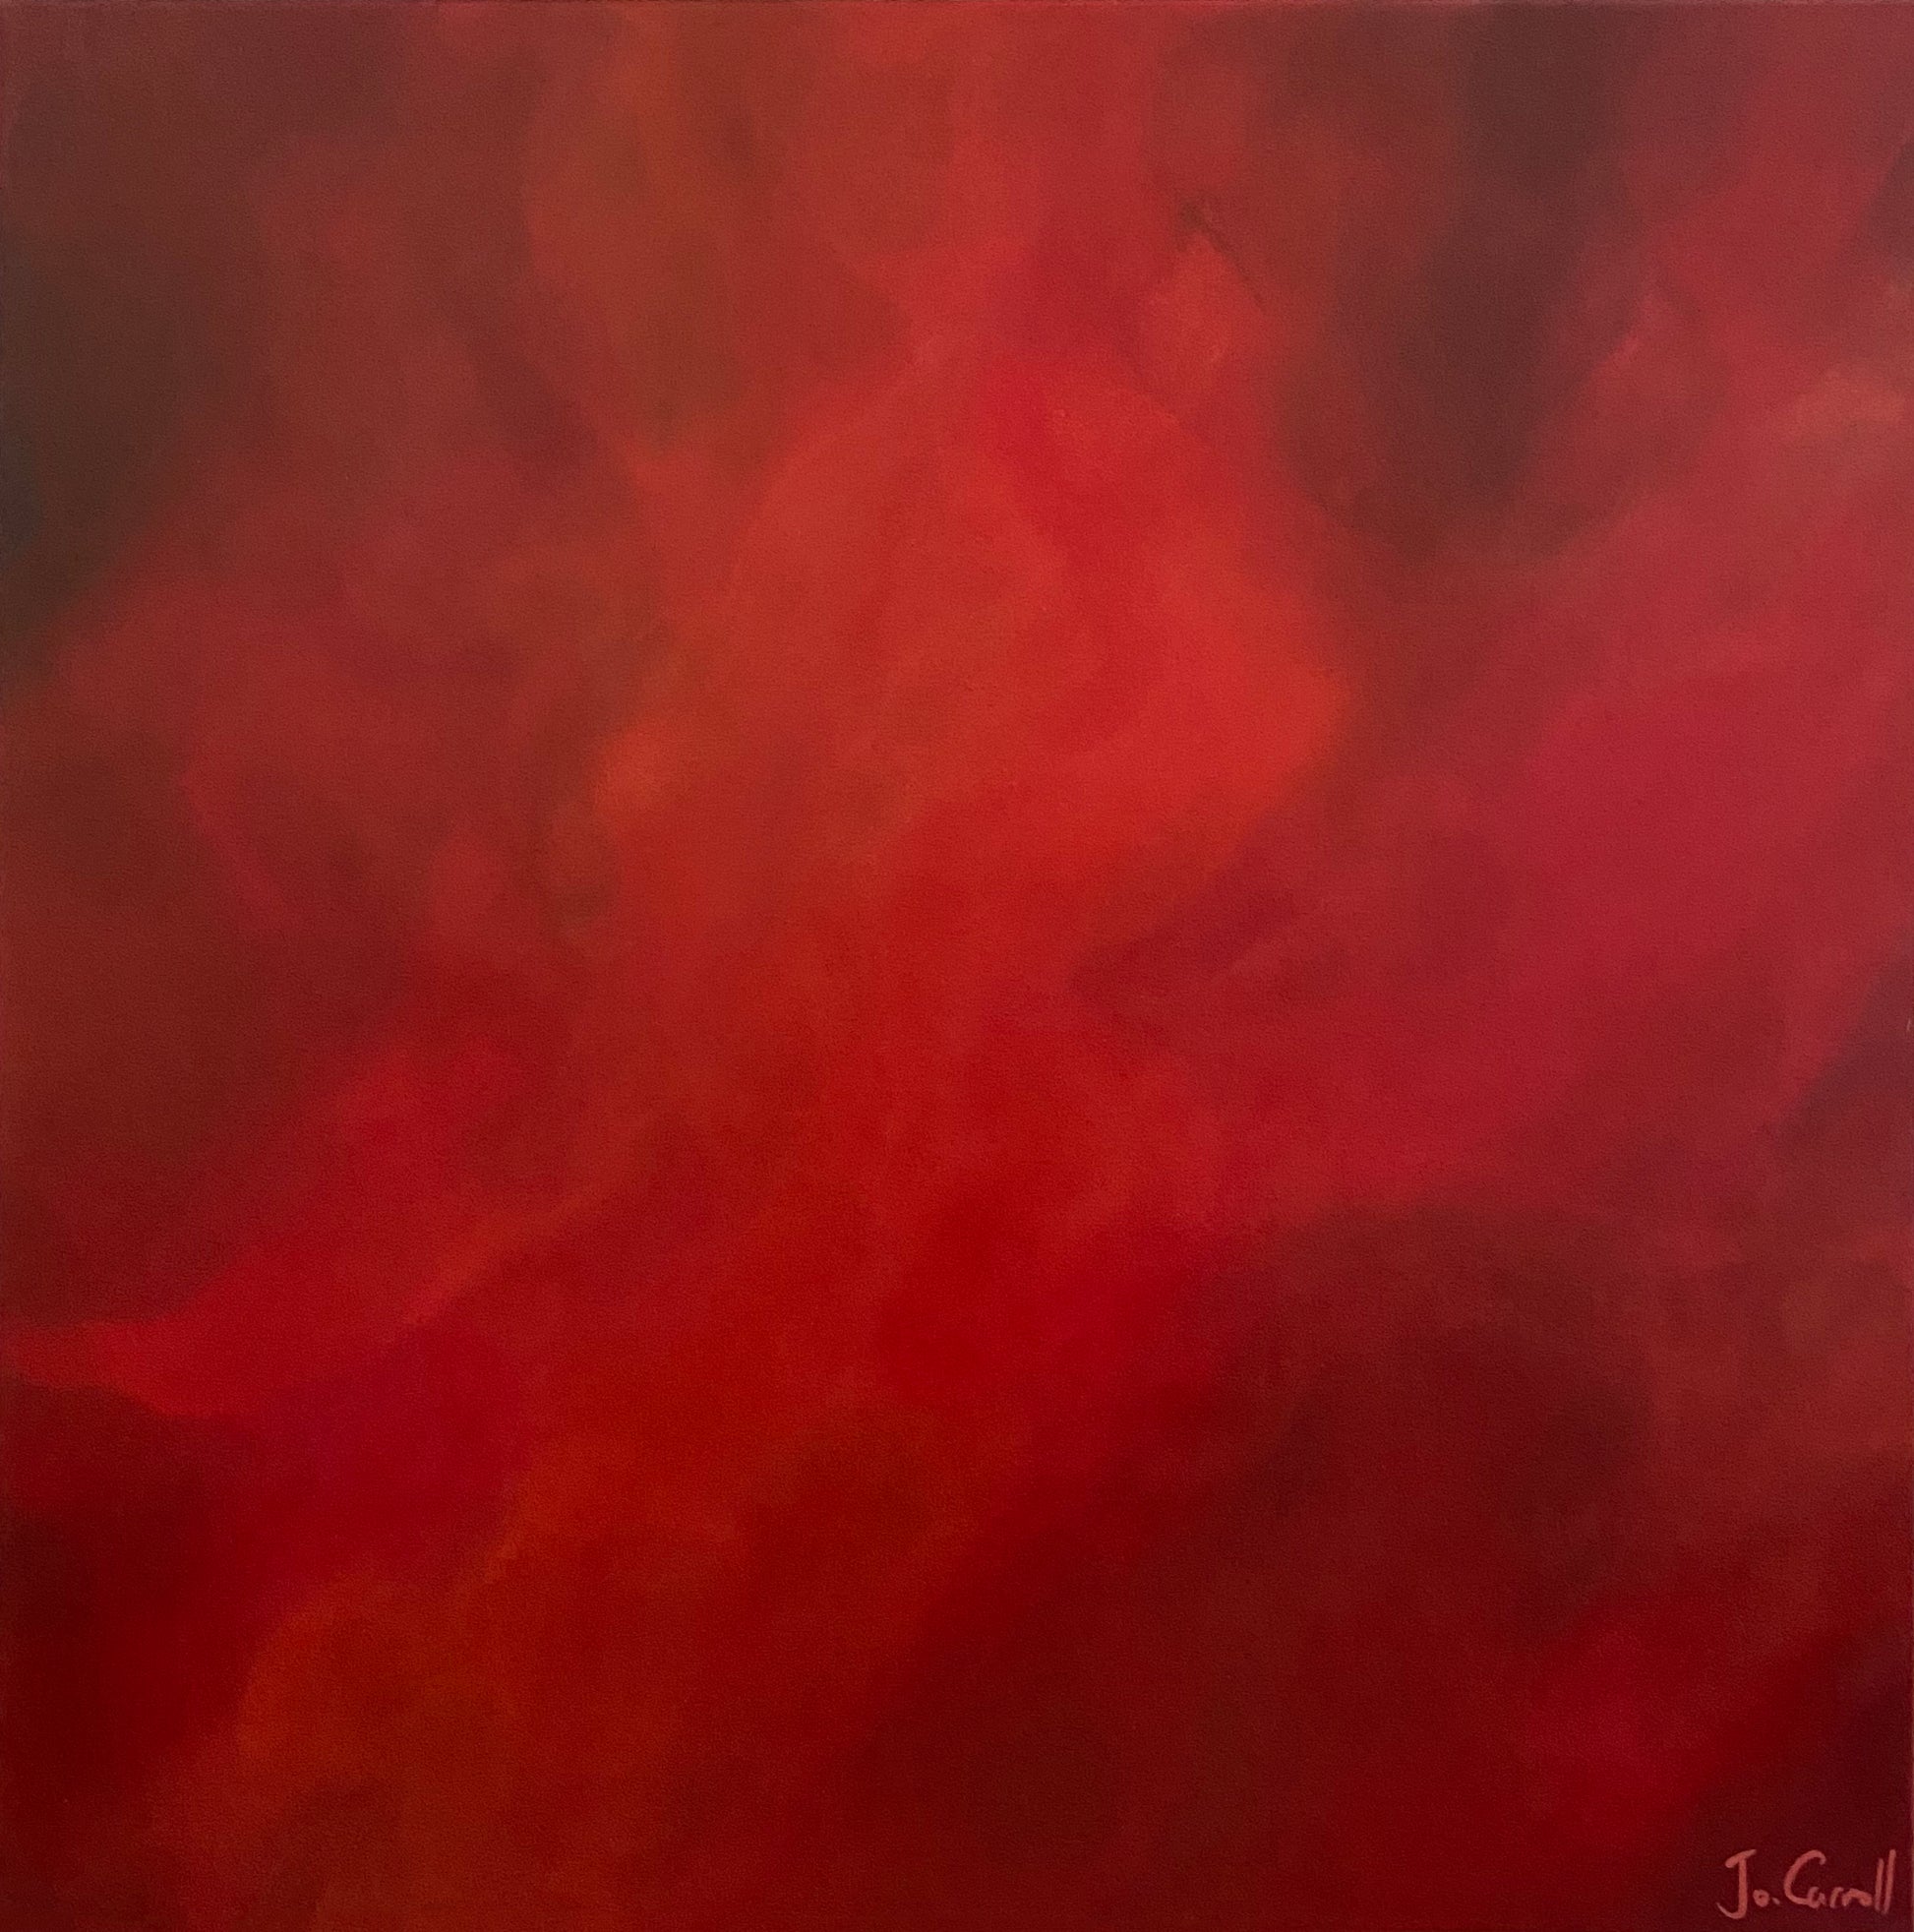 red artwork expressing love, passionate art, romantic artwork, desire and longing painting, vibrant red art, emotive expression artwork, fiery embrace of love, captivating red masterpiece, intense desire painting, passionate ode to love.